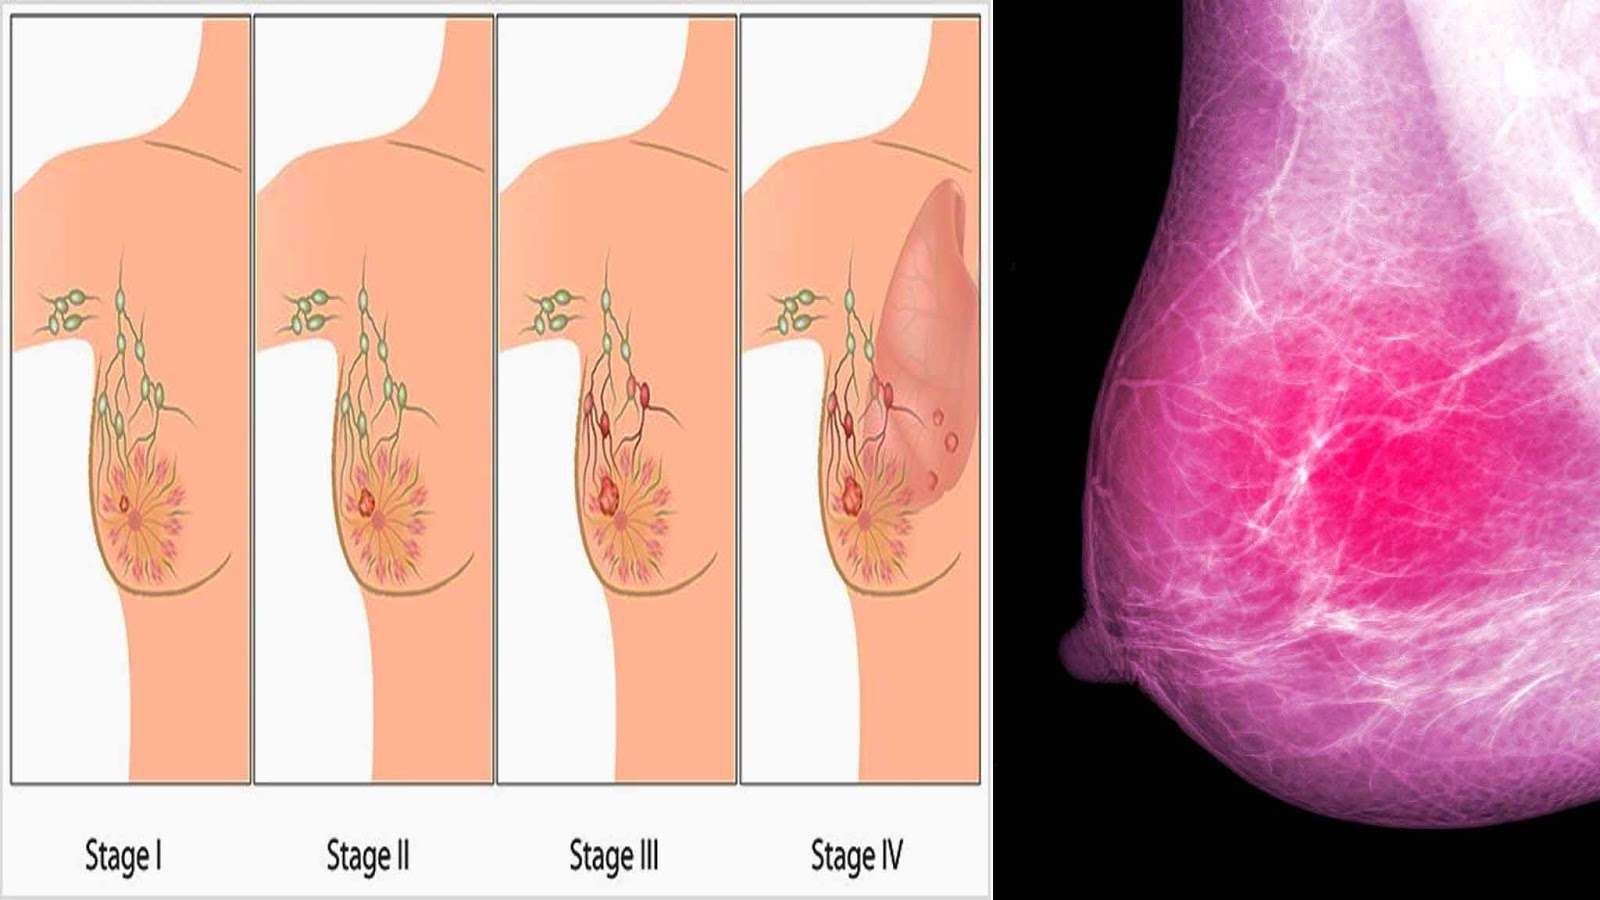 Signs of Breast Cancer Most Women Ignore